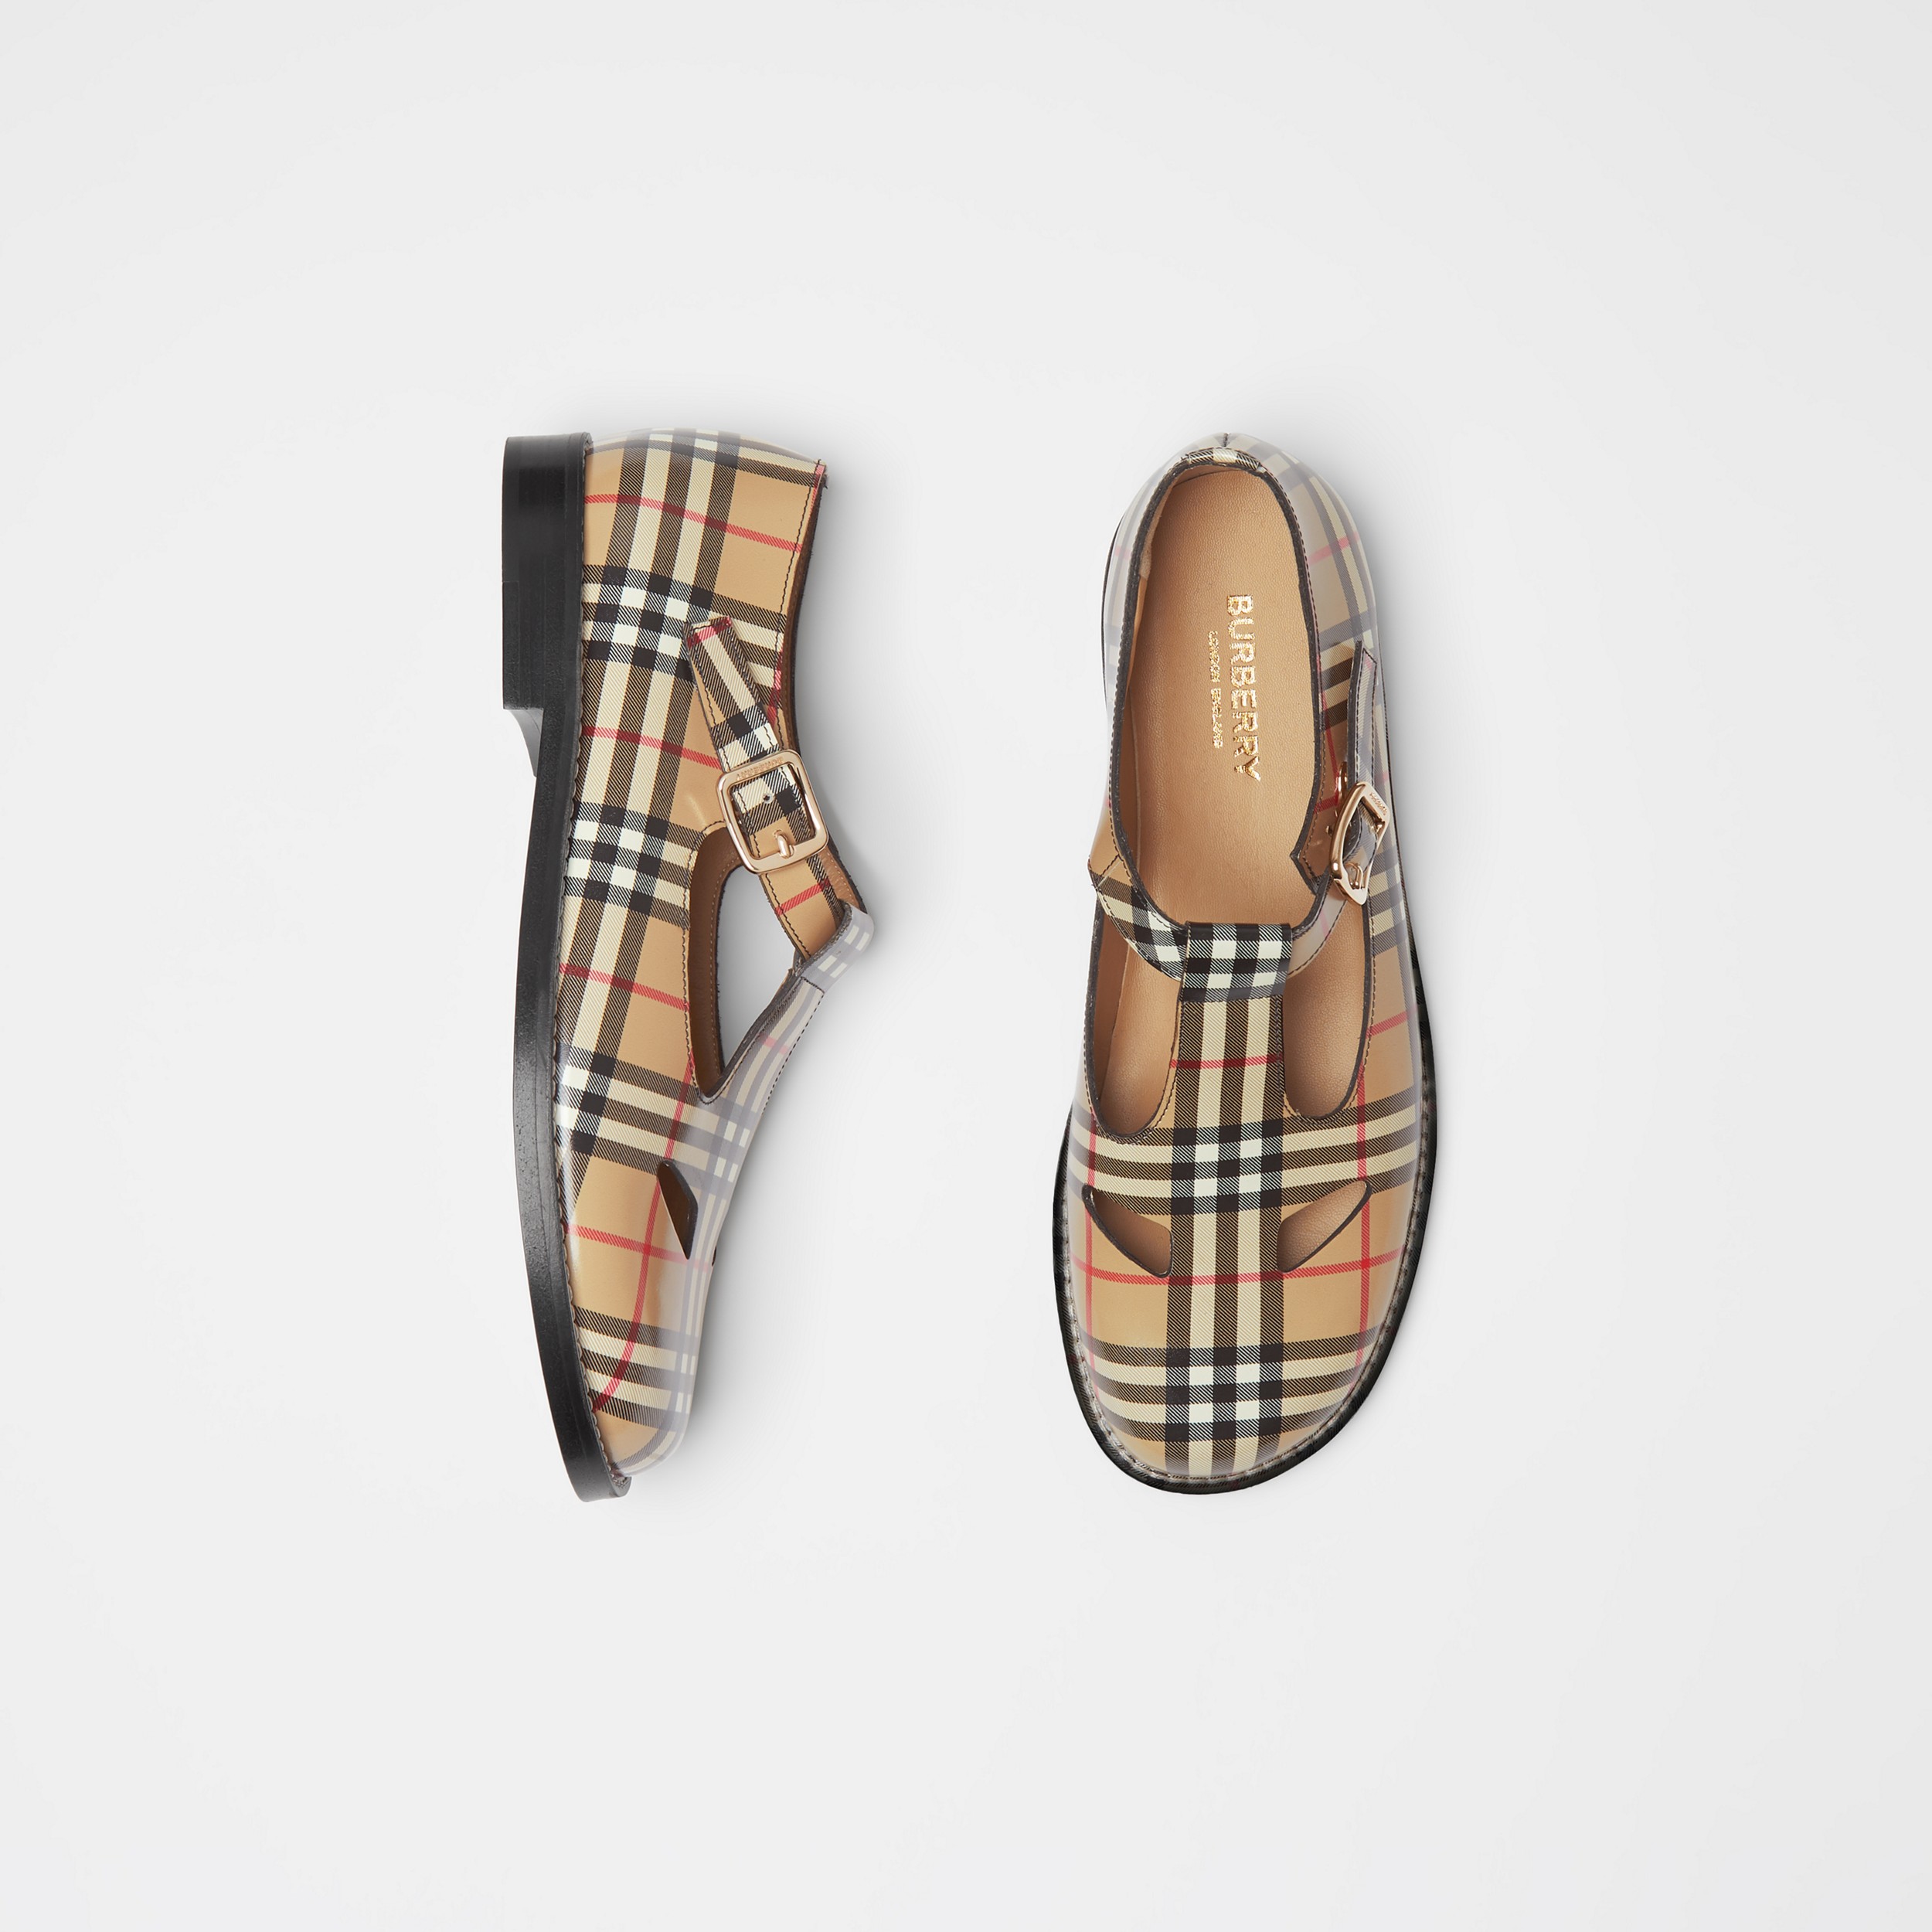 Vintage Check Leather T-bar Shoes in Archive Beige - Women | Burberry Hong Kong S.A.R - 1